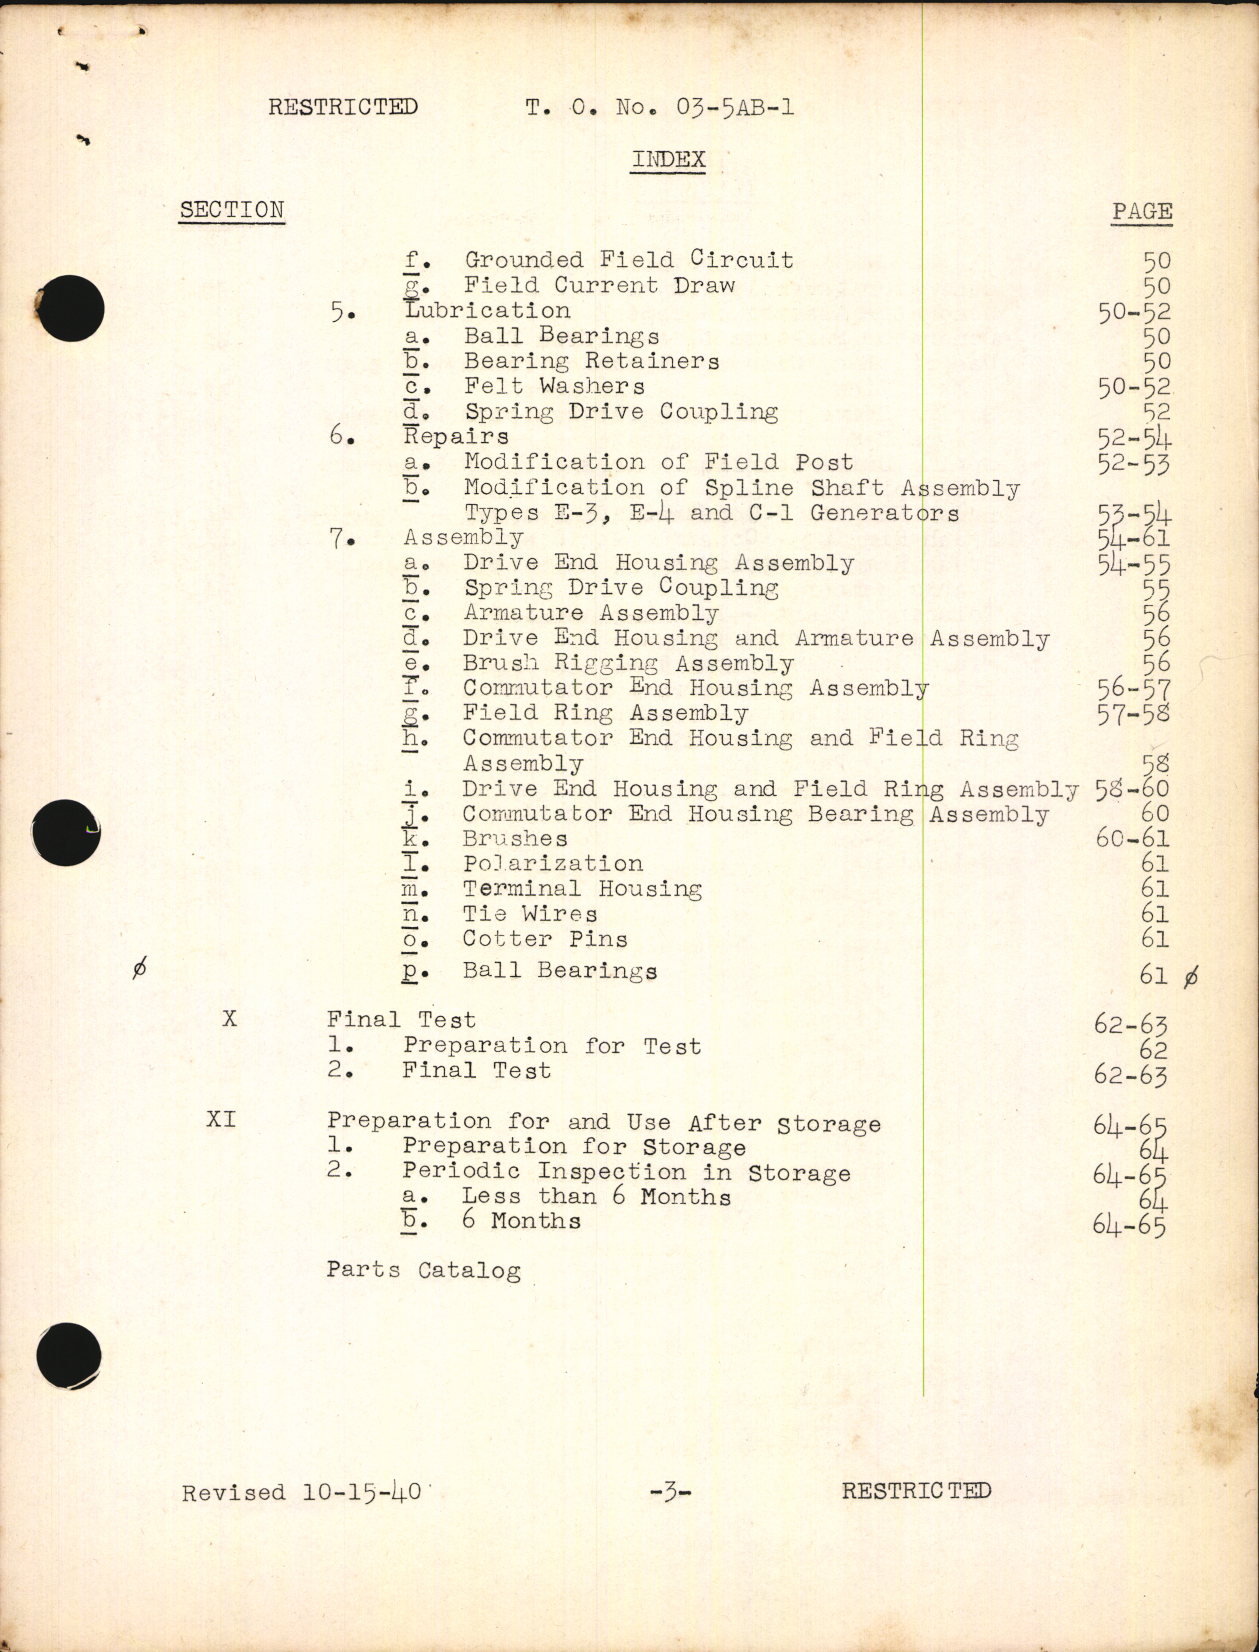 Sample page 5 from AirCorps Library document: Handbook of Instructions with Parts Catalog for Aircraft Engine Generators and Control Box Types E5, E8, and D4